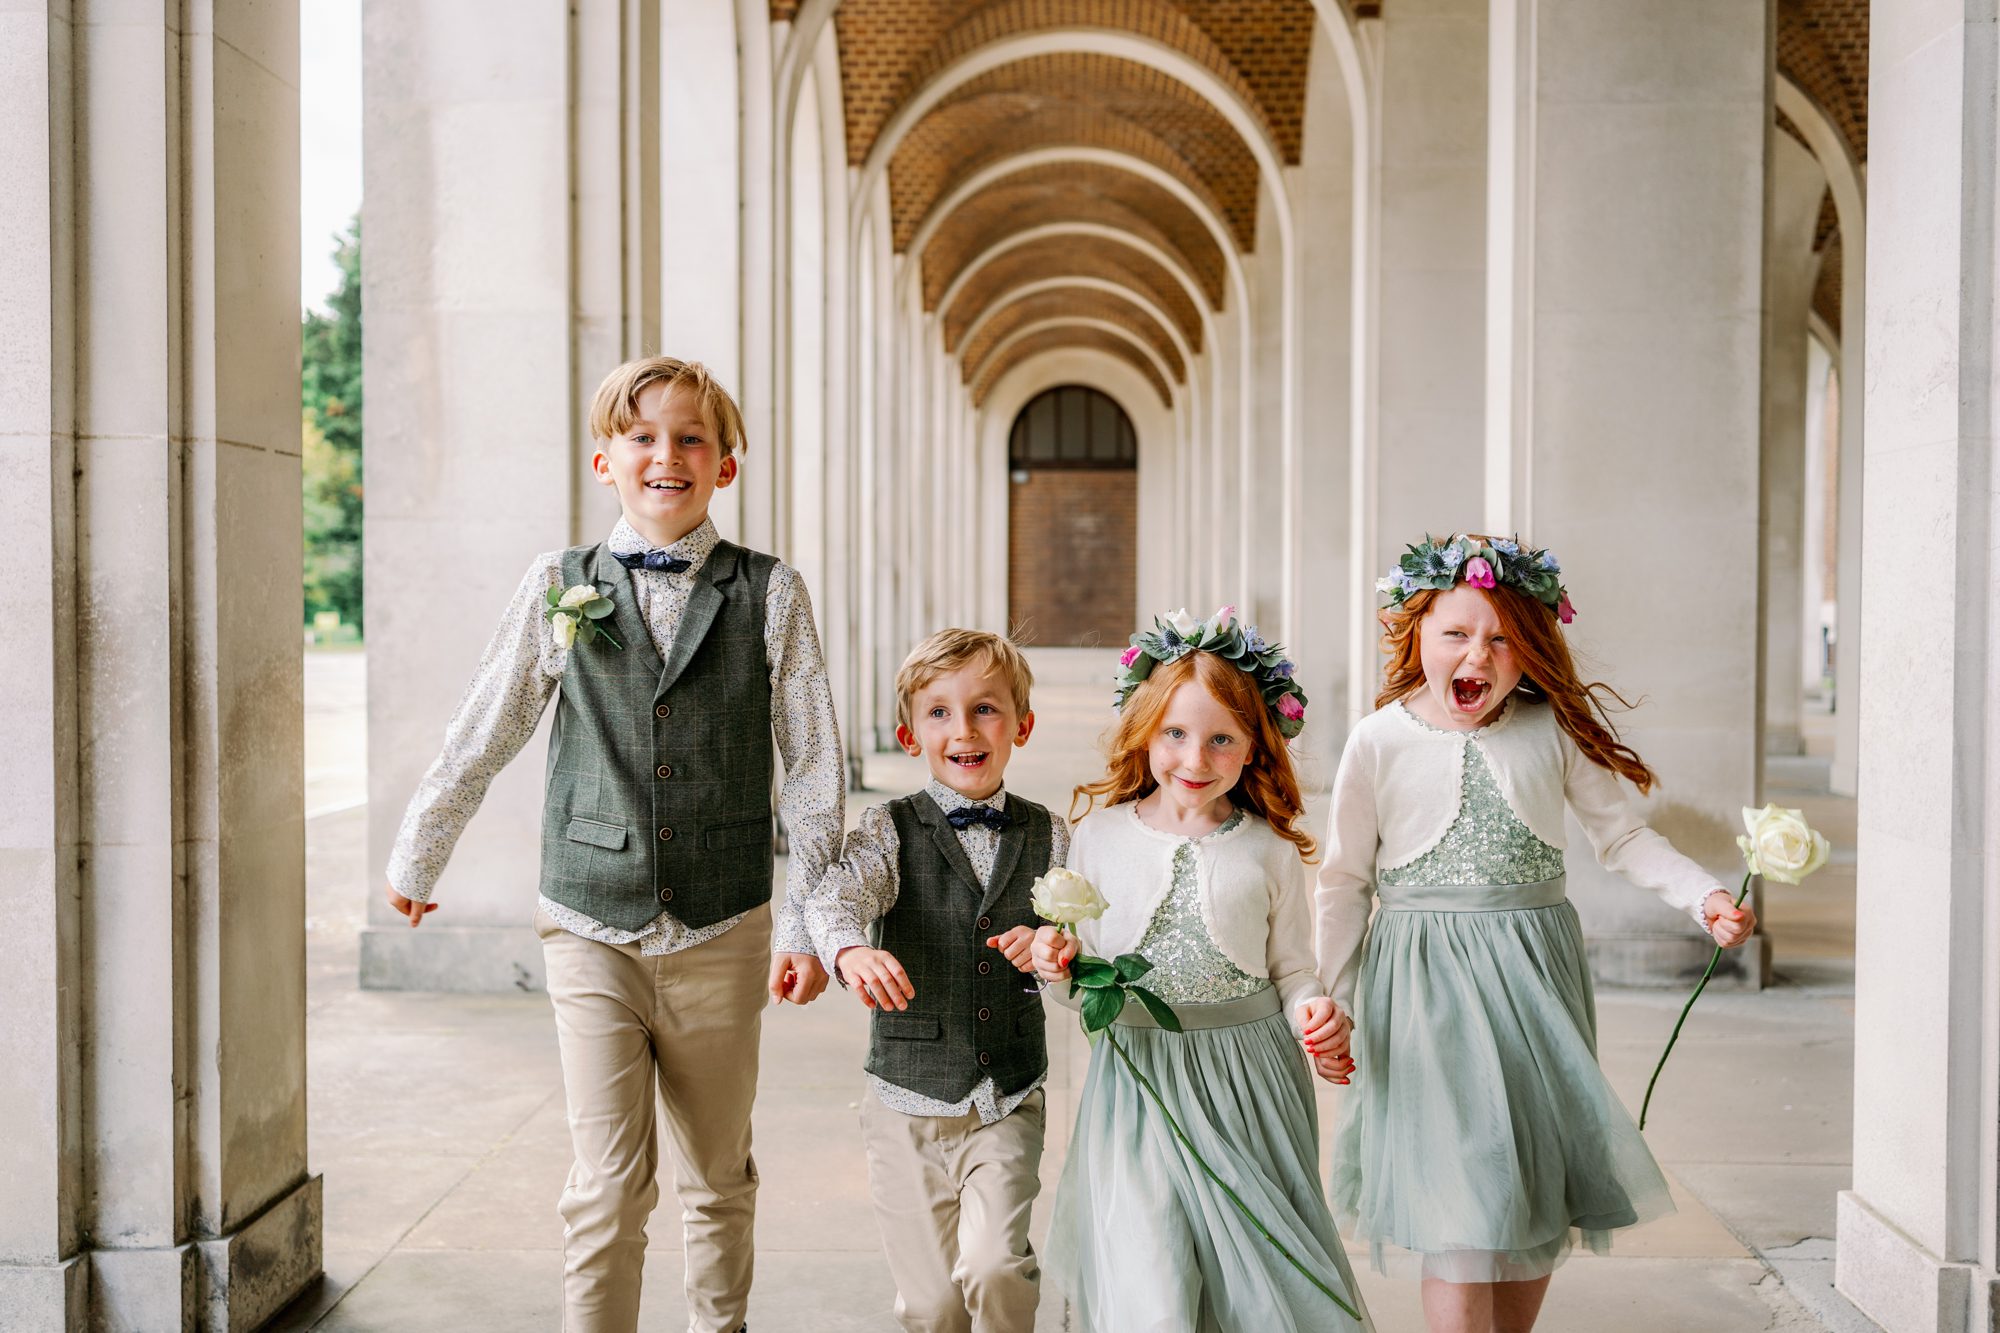 Relaxed and joyful page boy and bridesmaids at Hertford registry offices.